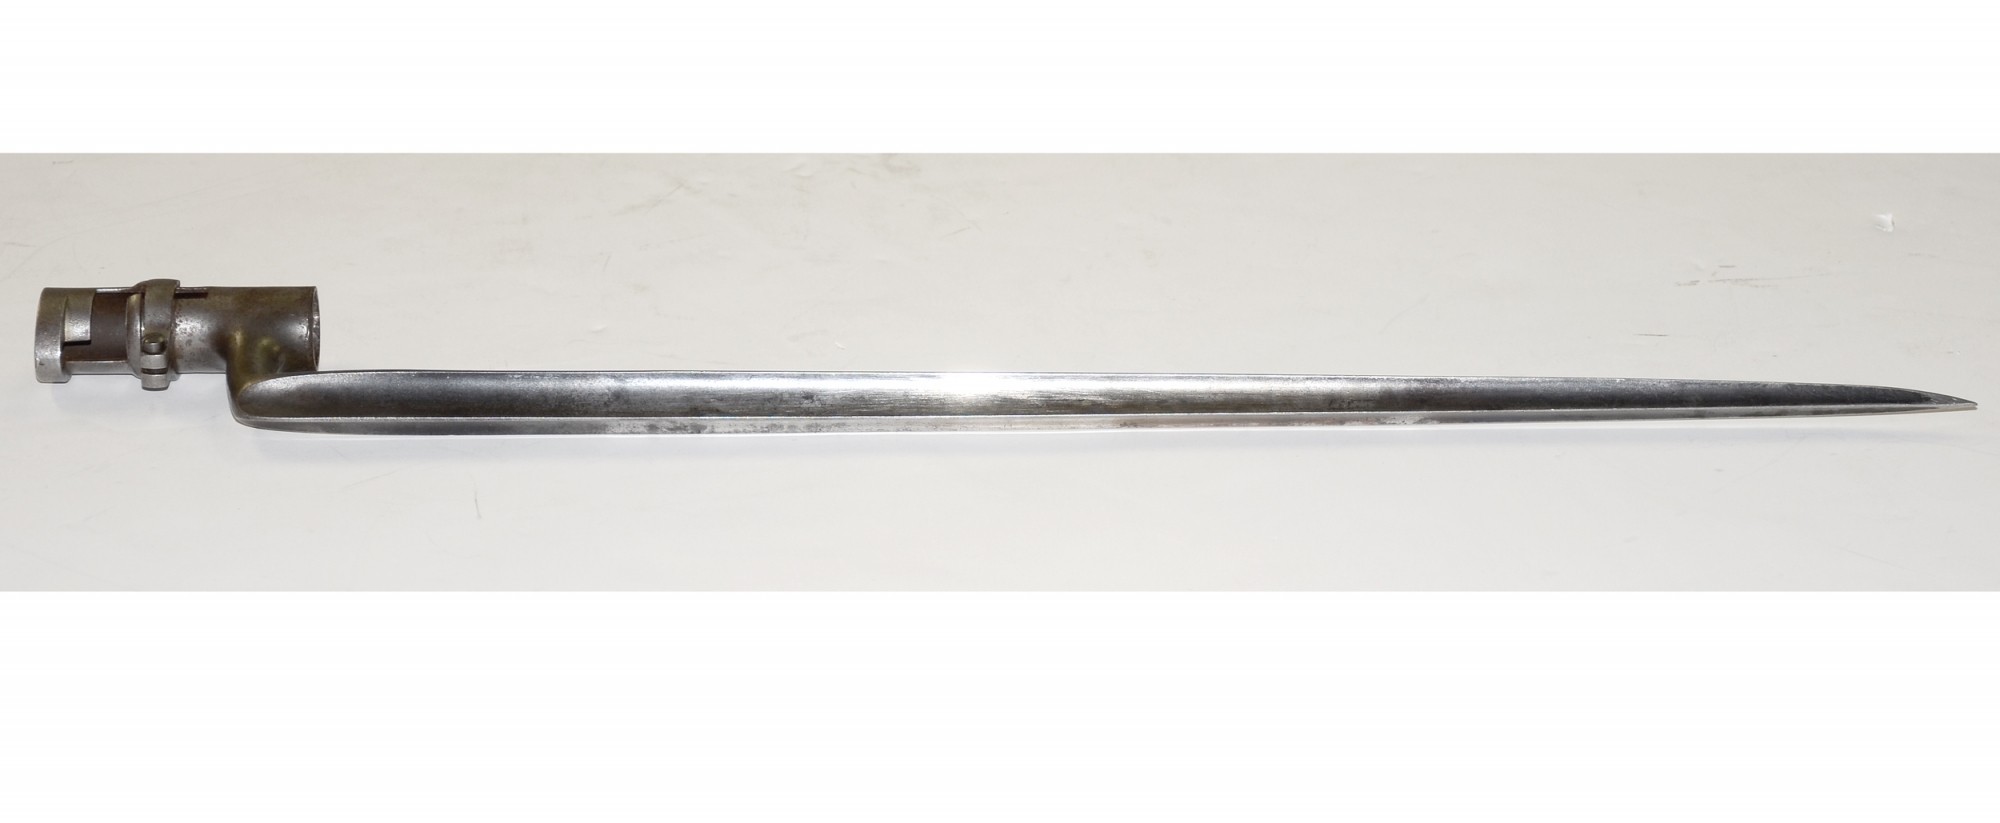 RARE SOCKET BAYONET FOR THE MODEL 1860 SPENCER RIFLE — Horse Soldier